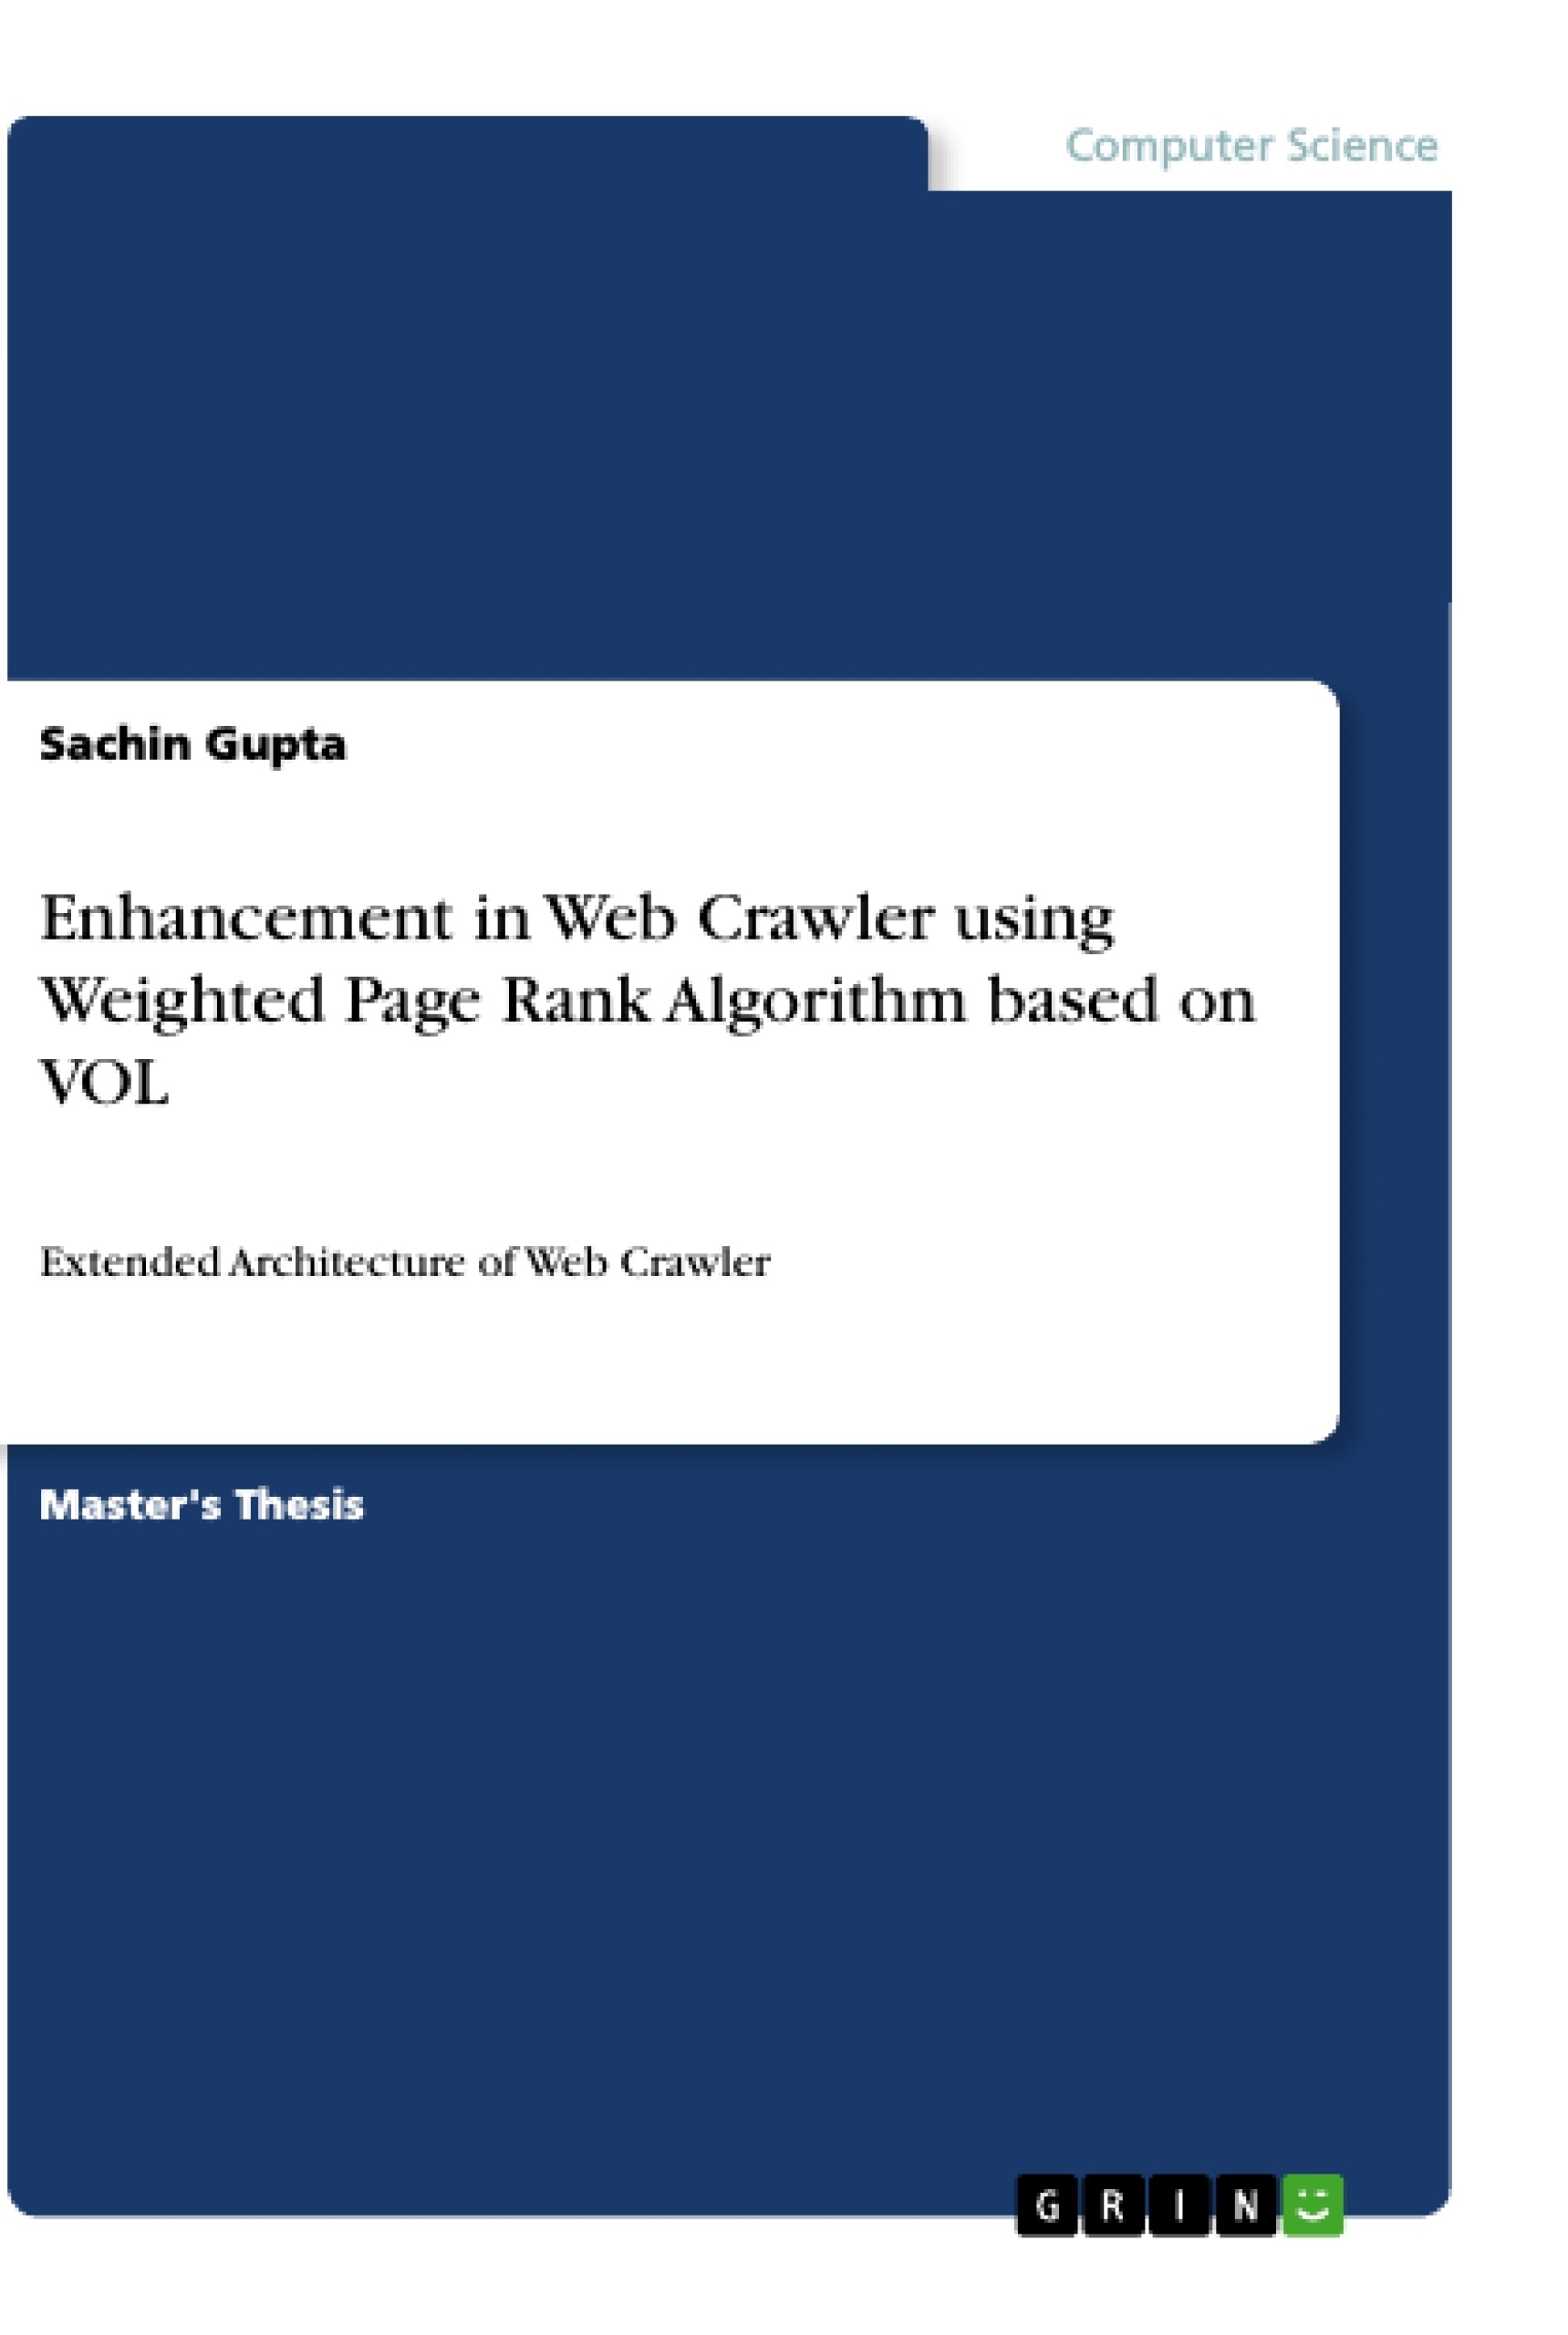 Título: Enhancement in Web Crawler using Weighted Page Rank Algorithm based on VOL